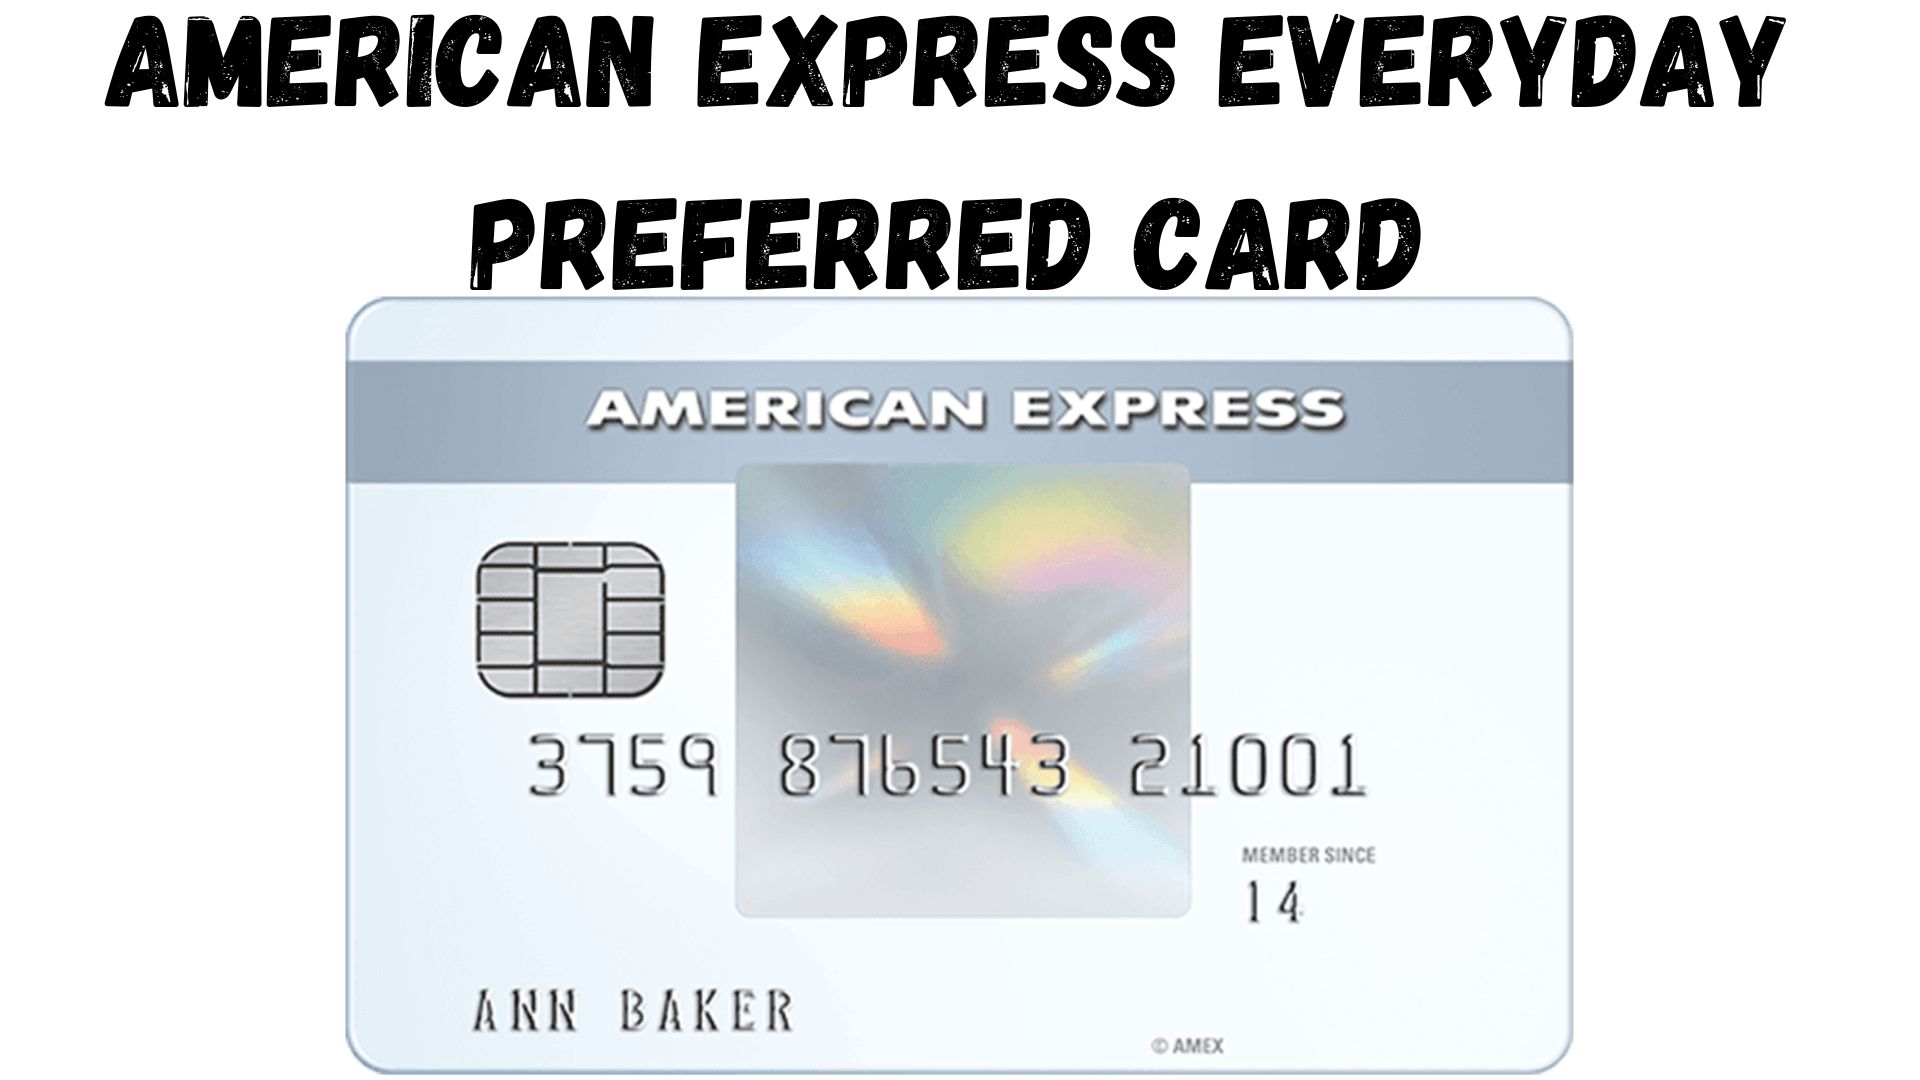 American Express Everyday Preferred Card